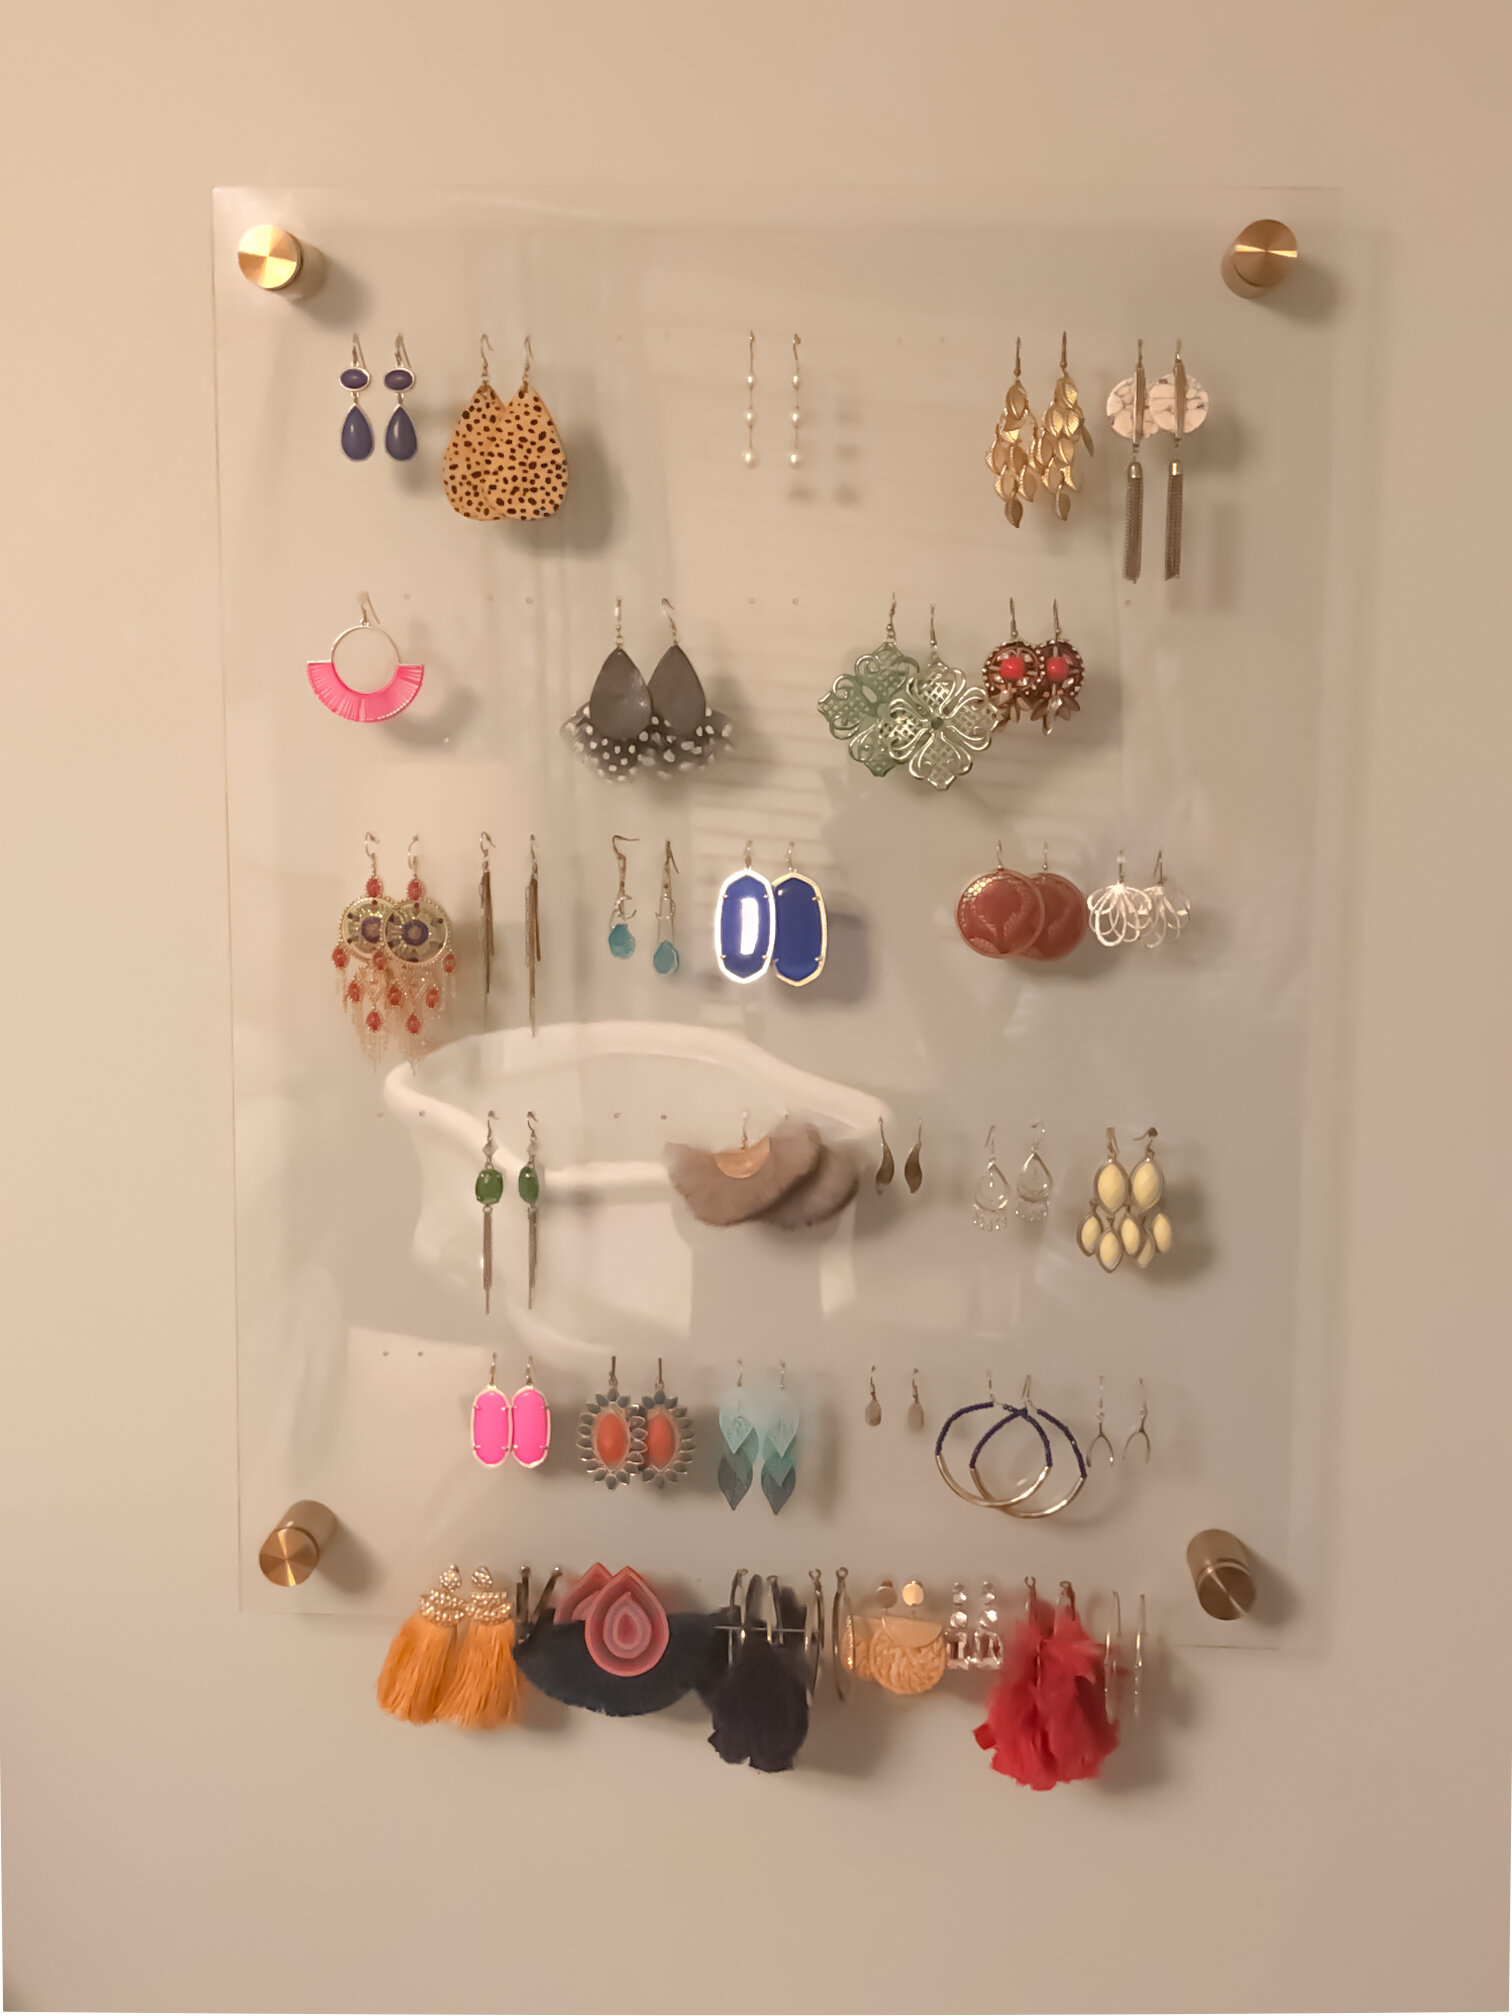 7 Clever DIY Earring Holder Ideas to Organize Your Earrings  Diy earring  storage Diy jewelry display Jewelry storage diy